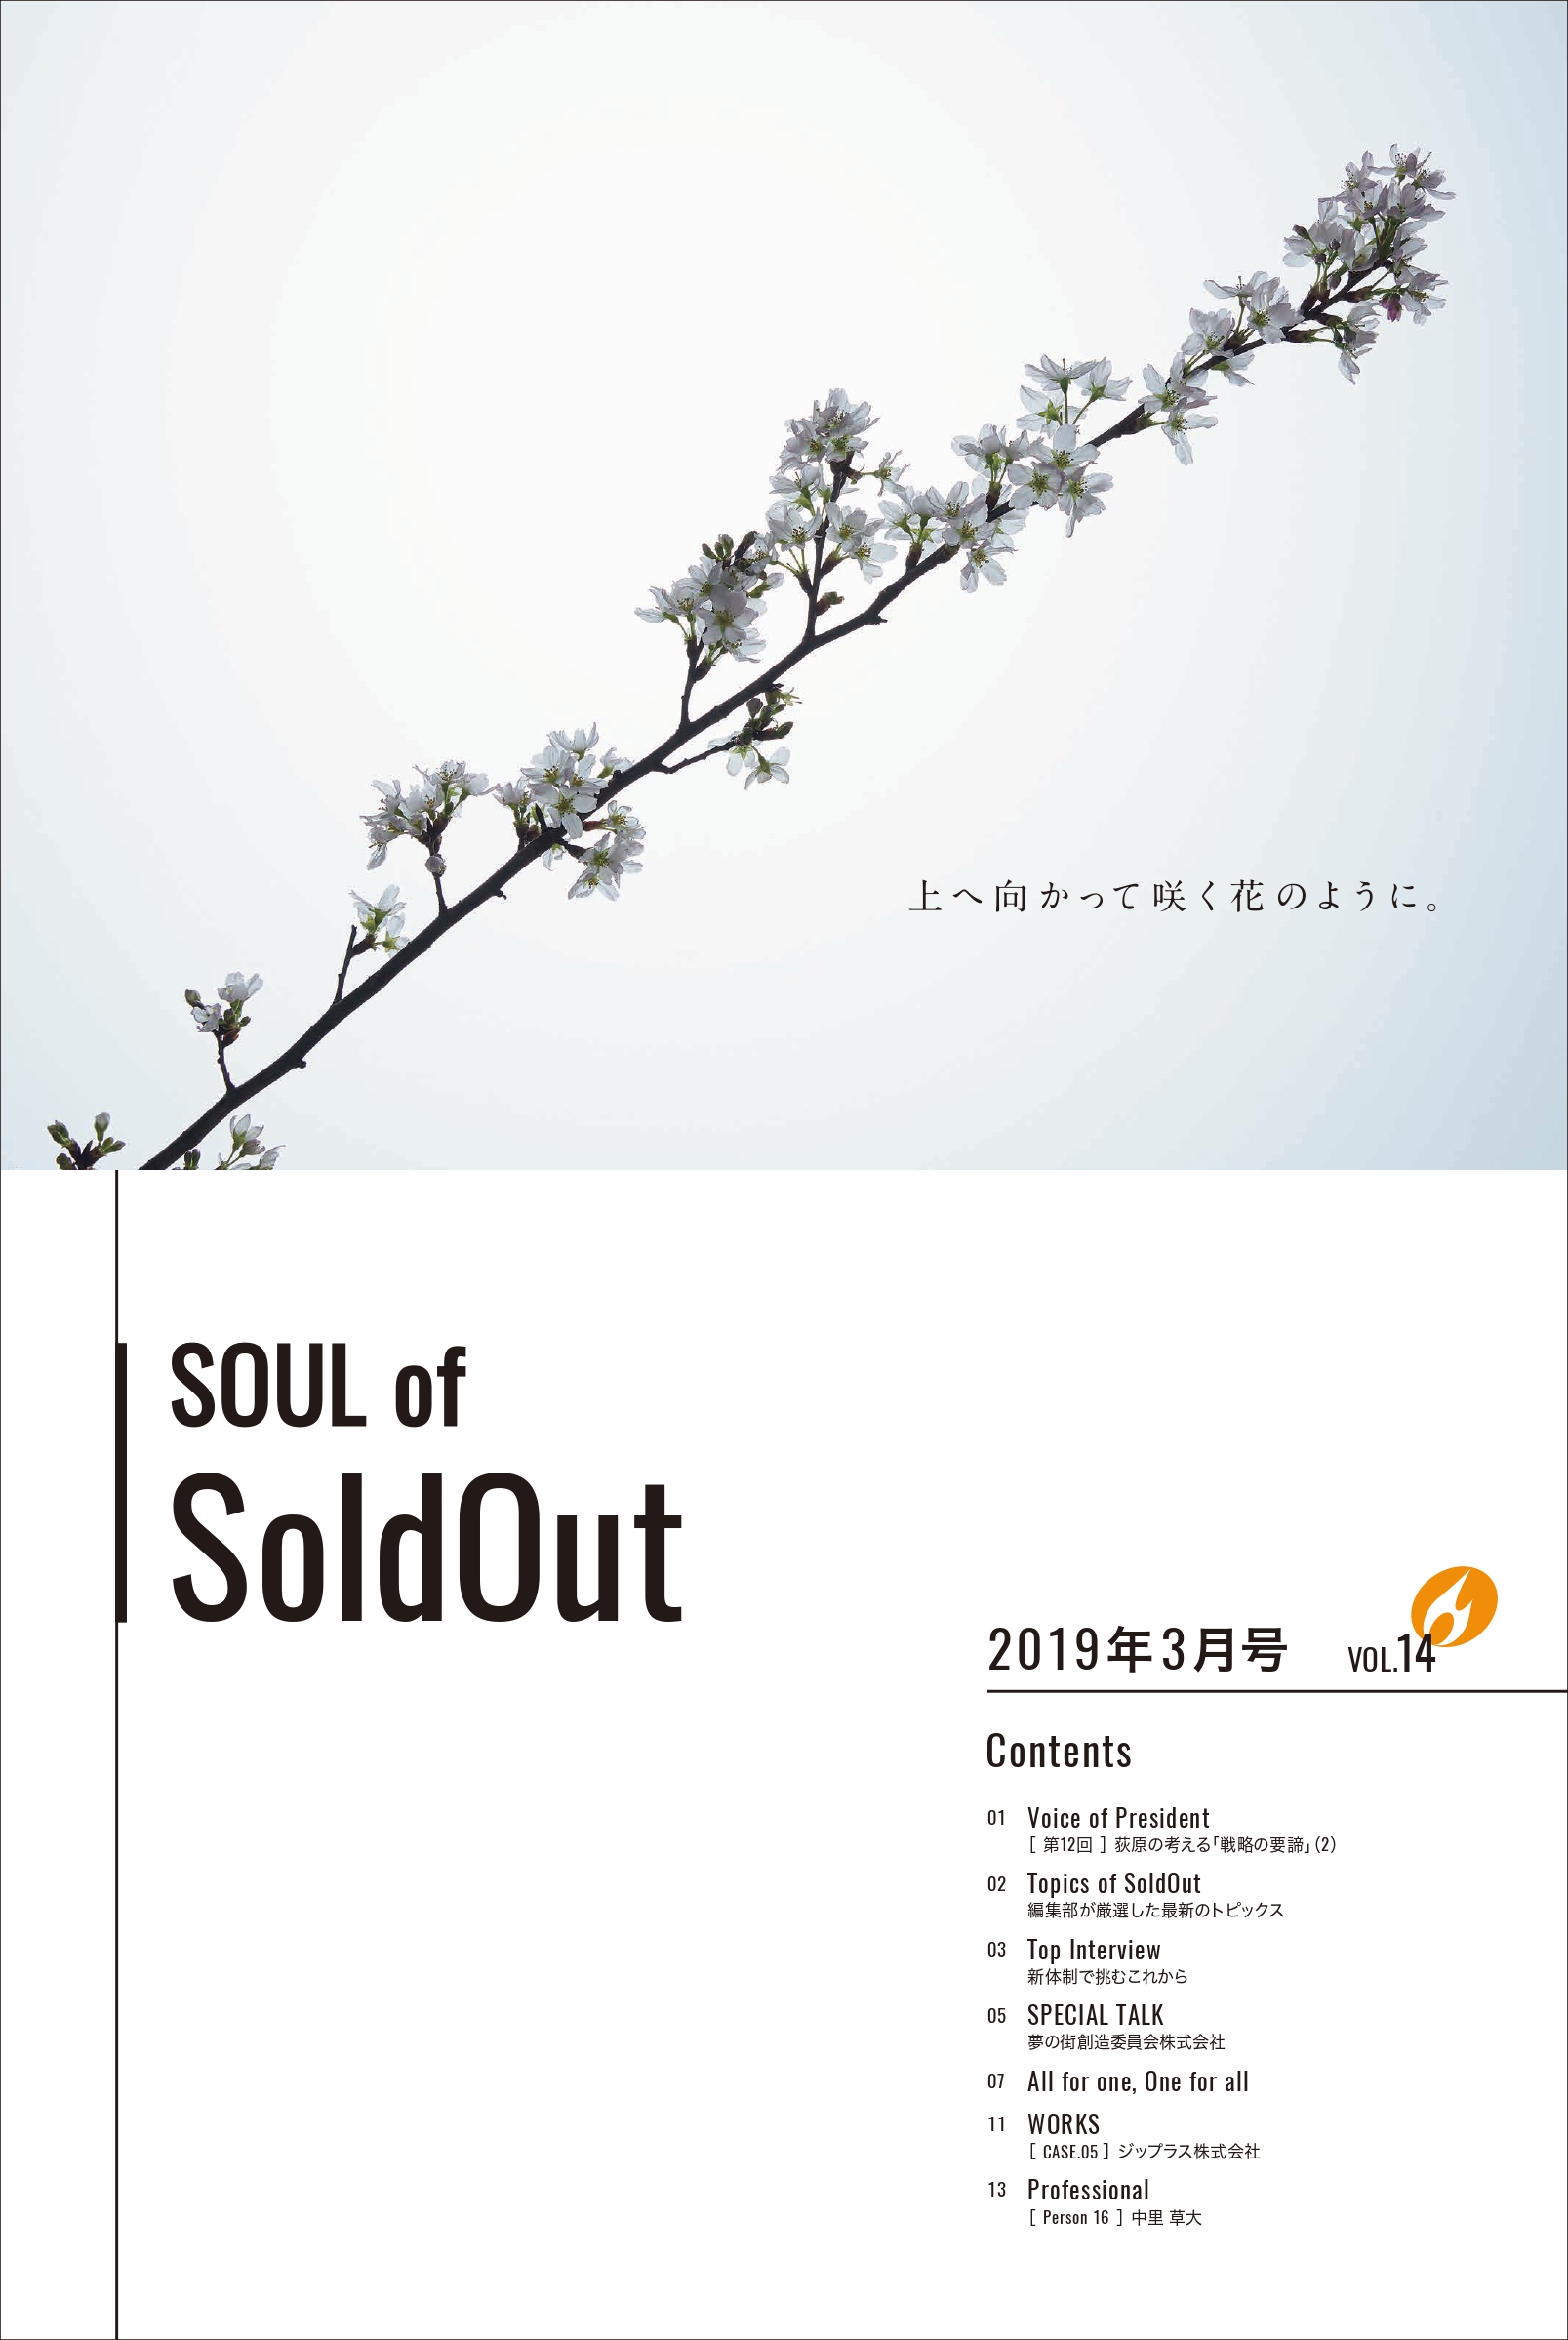 SOUL of SoldOut